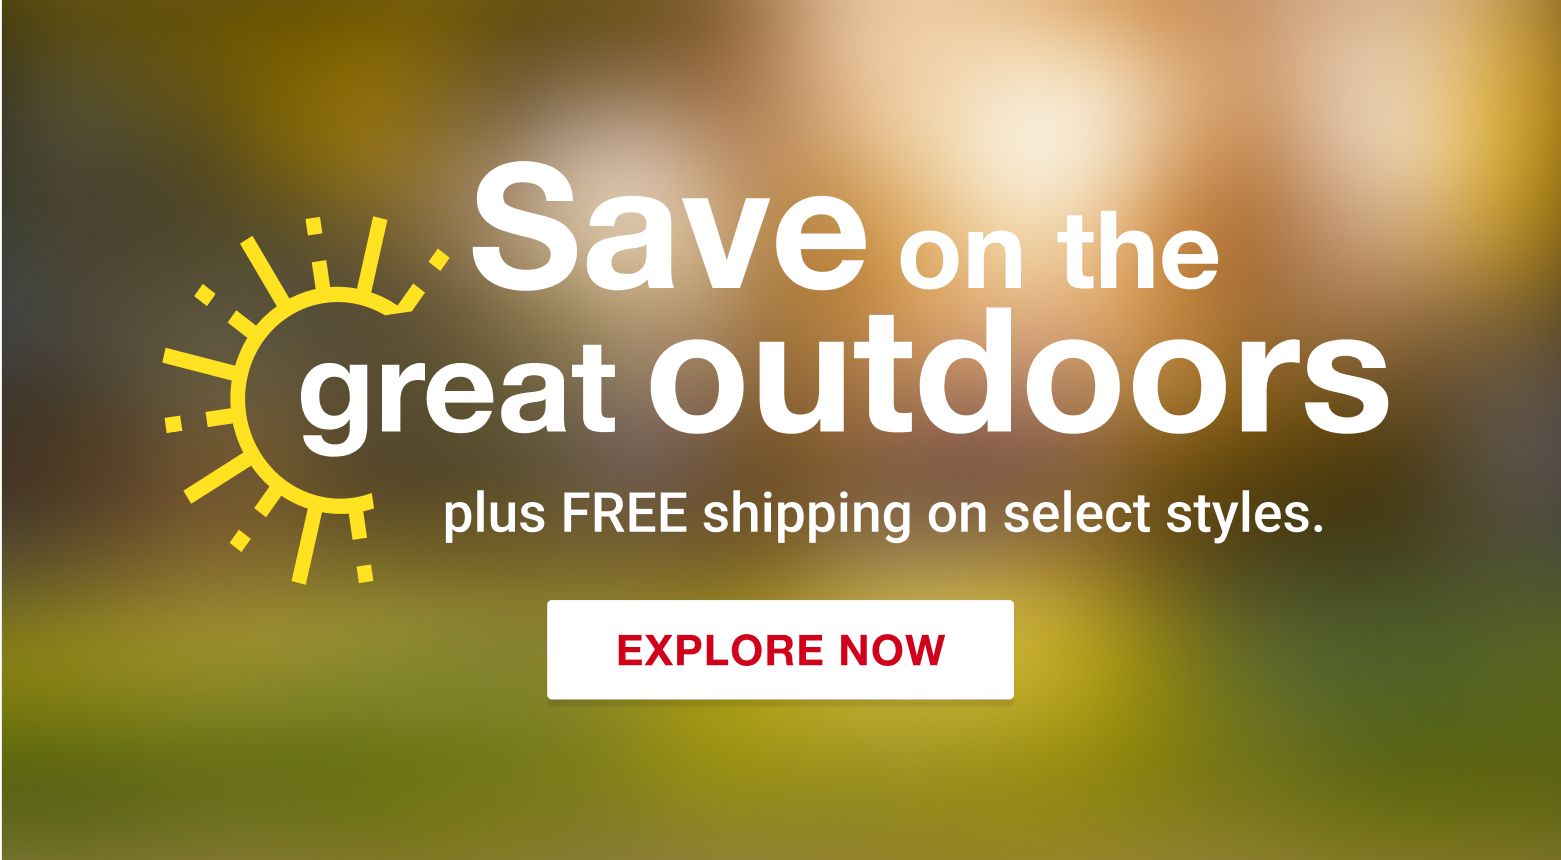 Save on the great outdoors plus free shipping on select styles. Click to explore now.